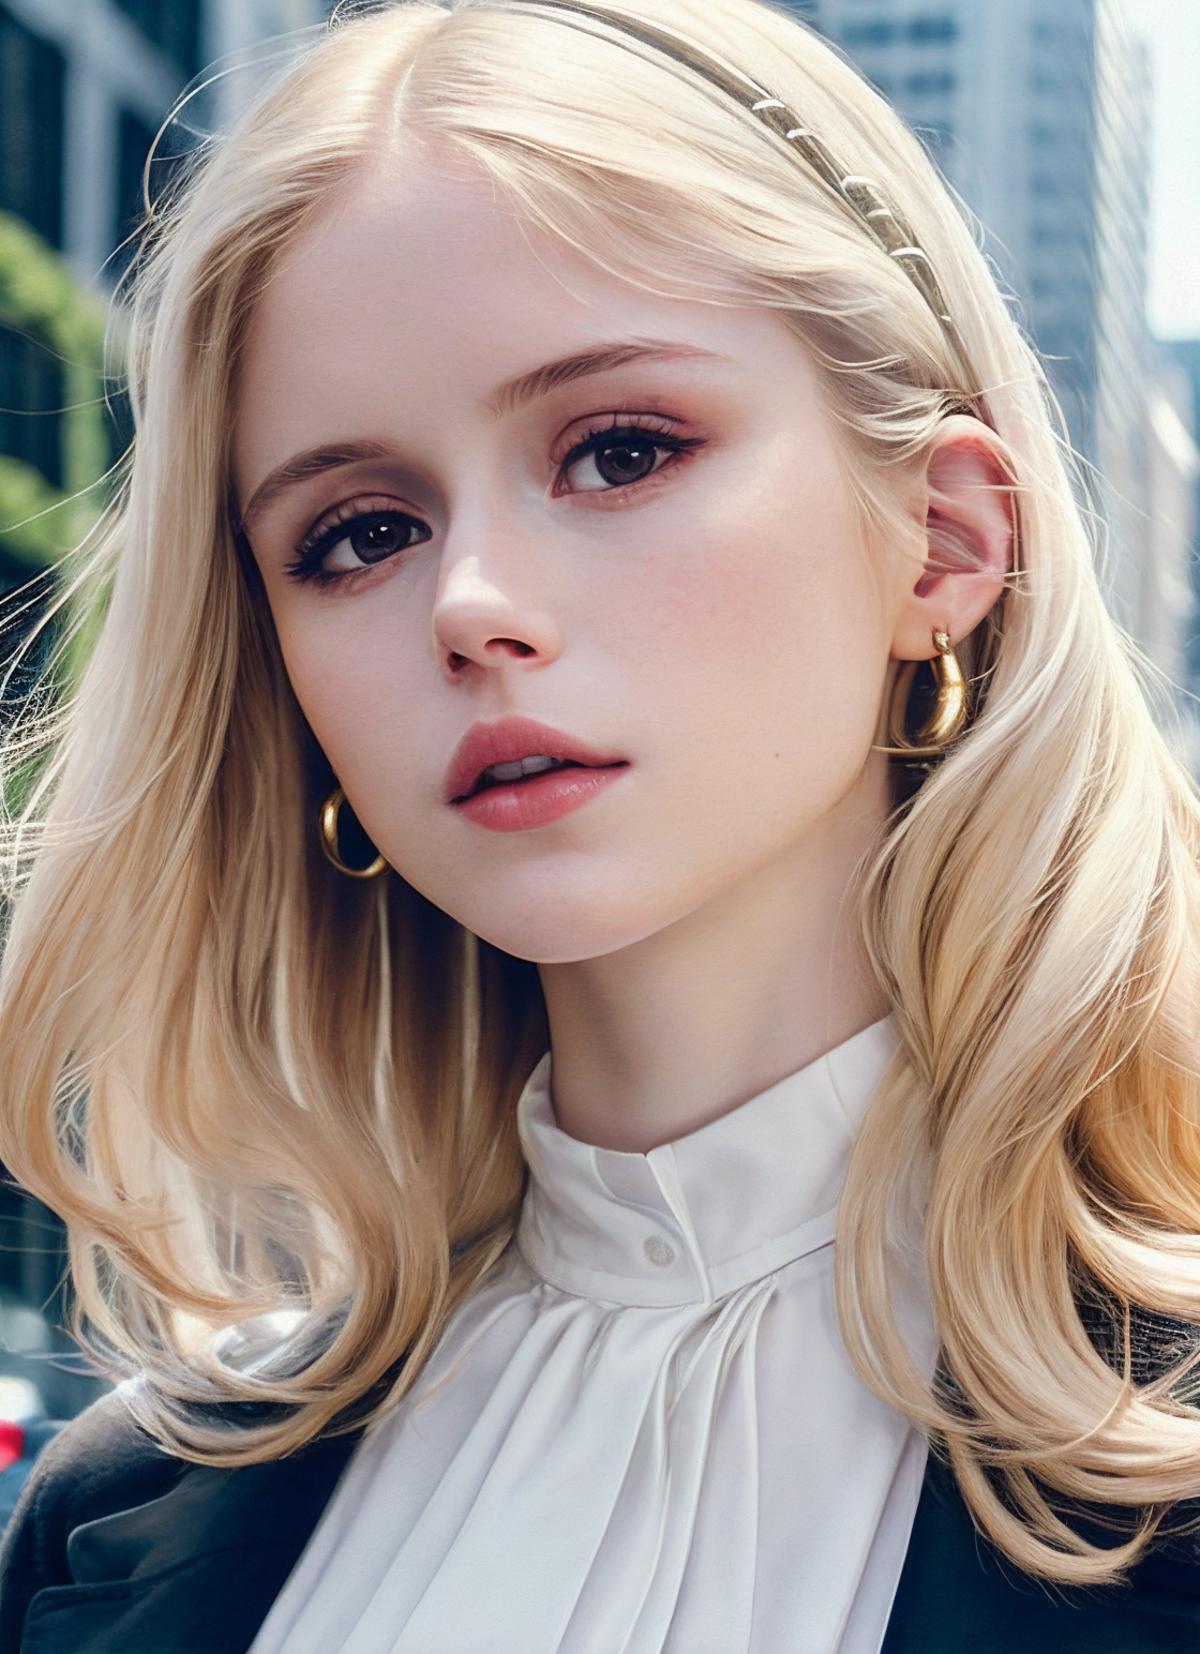 Erin Moriarty image by malcolmrey